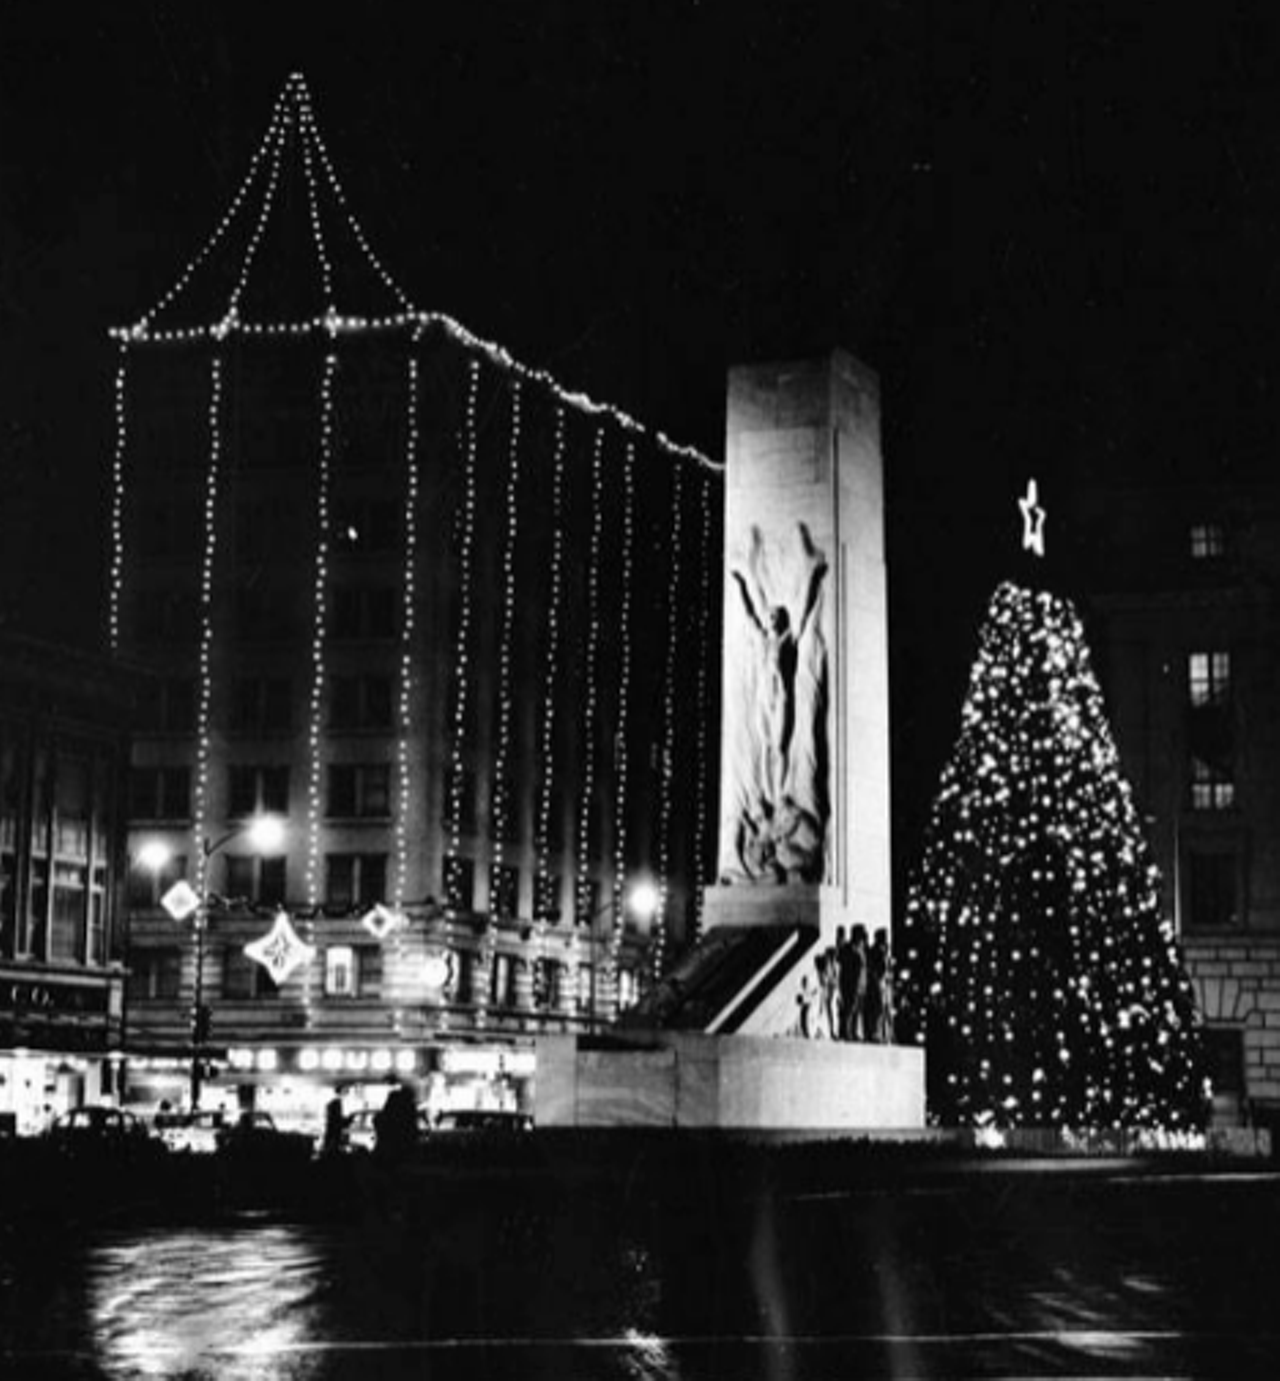 In this 1950 photograph, you can see the Christmas lights hung on the Gibbs building. Note the Christmas tree, from the city's Rotary Club, set up behind the Alamo Cenotaph.